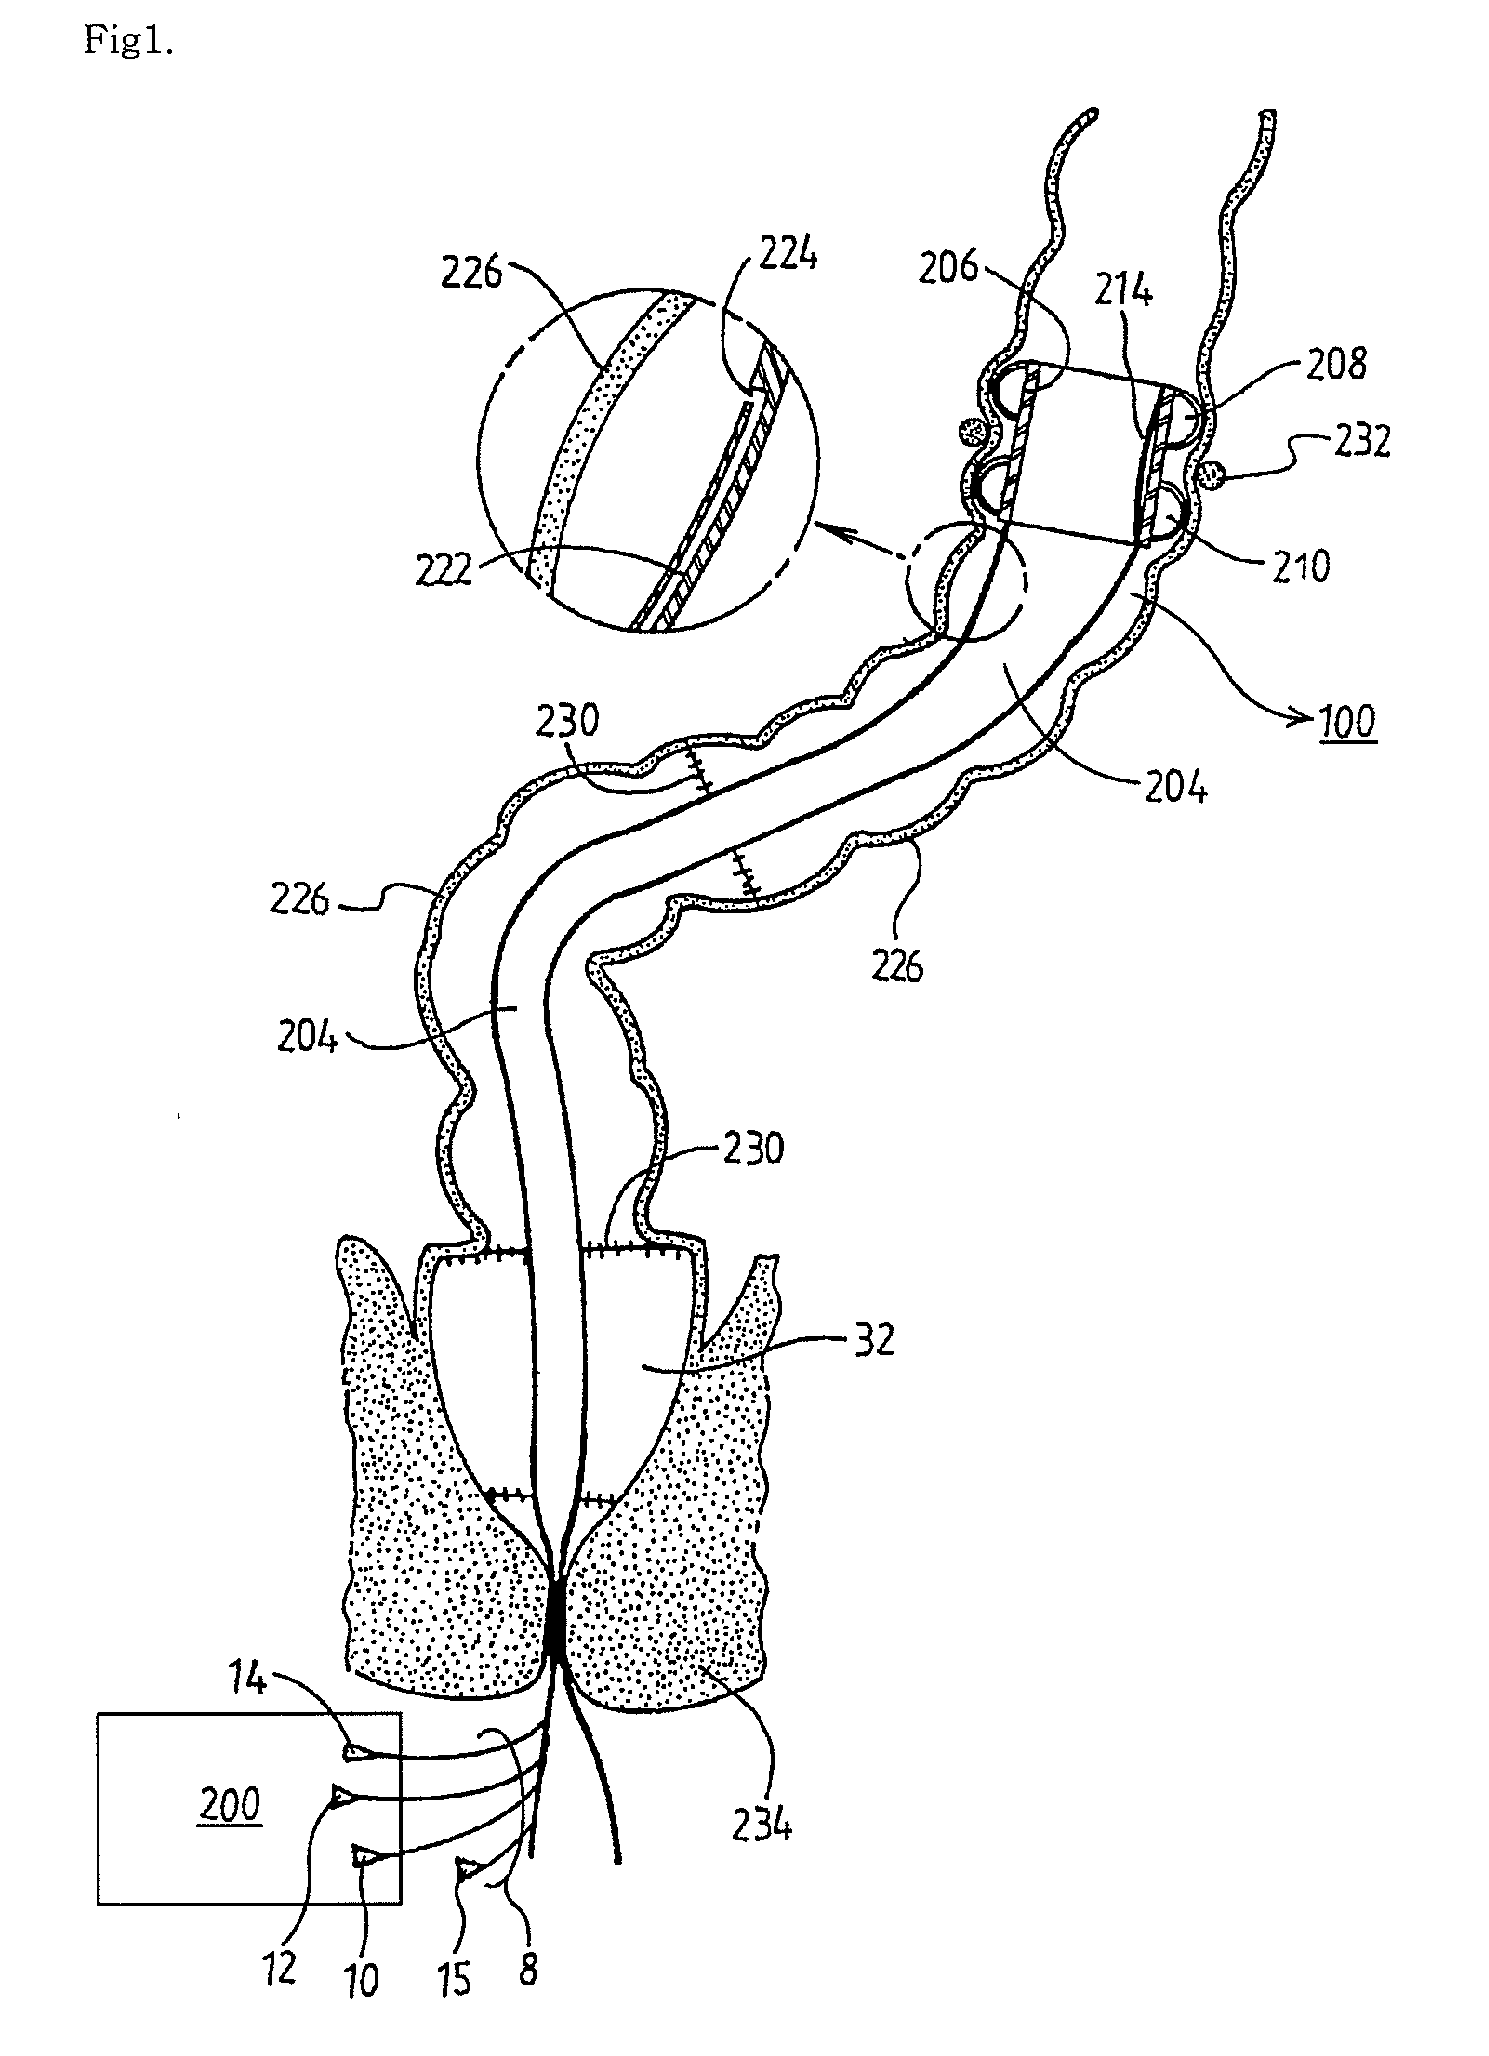 Apparatus and method for controlling fecal diverting device